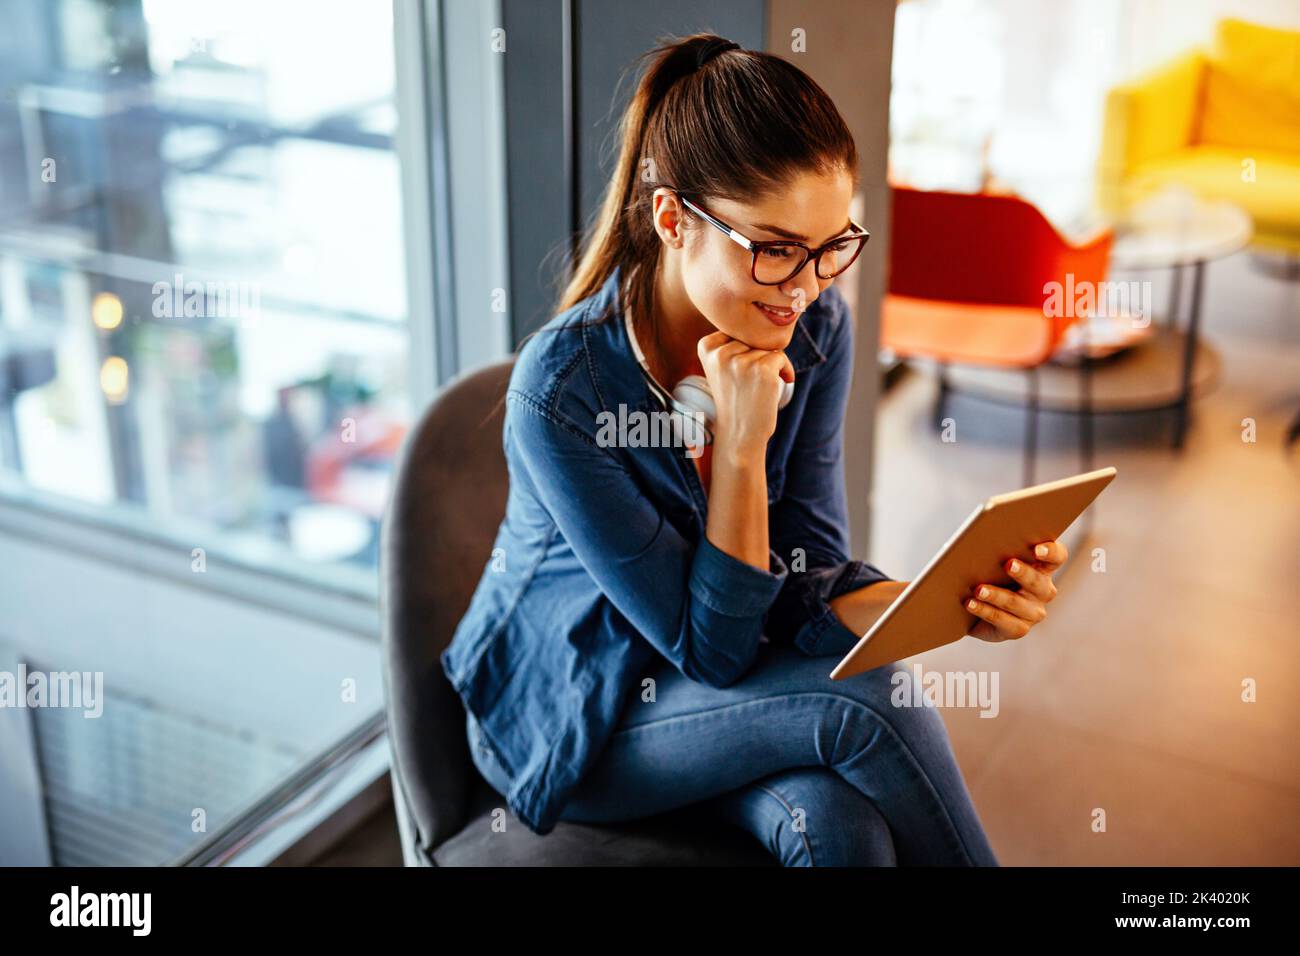 Portrait of happy young woman with a digital tablet. Business student people technology concept. Stock Photo